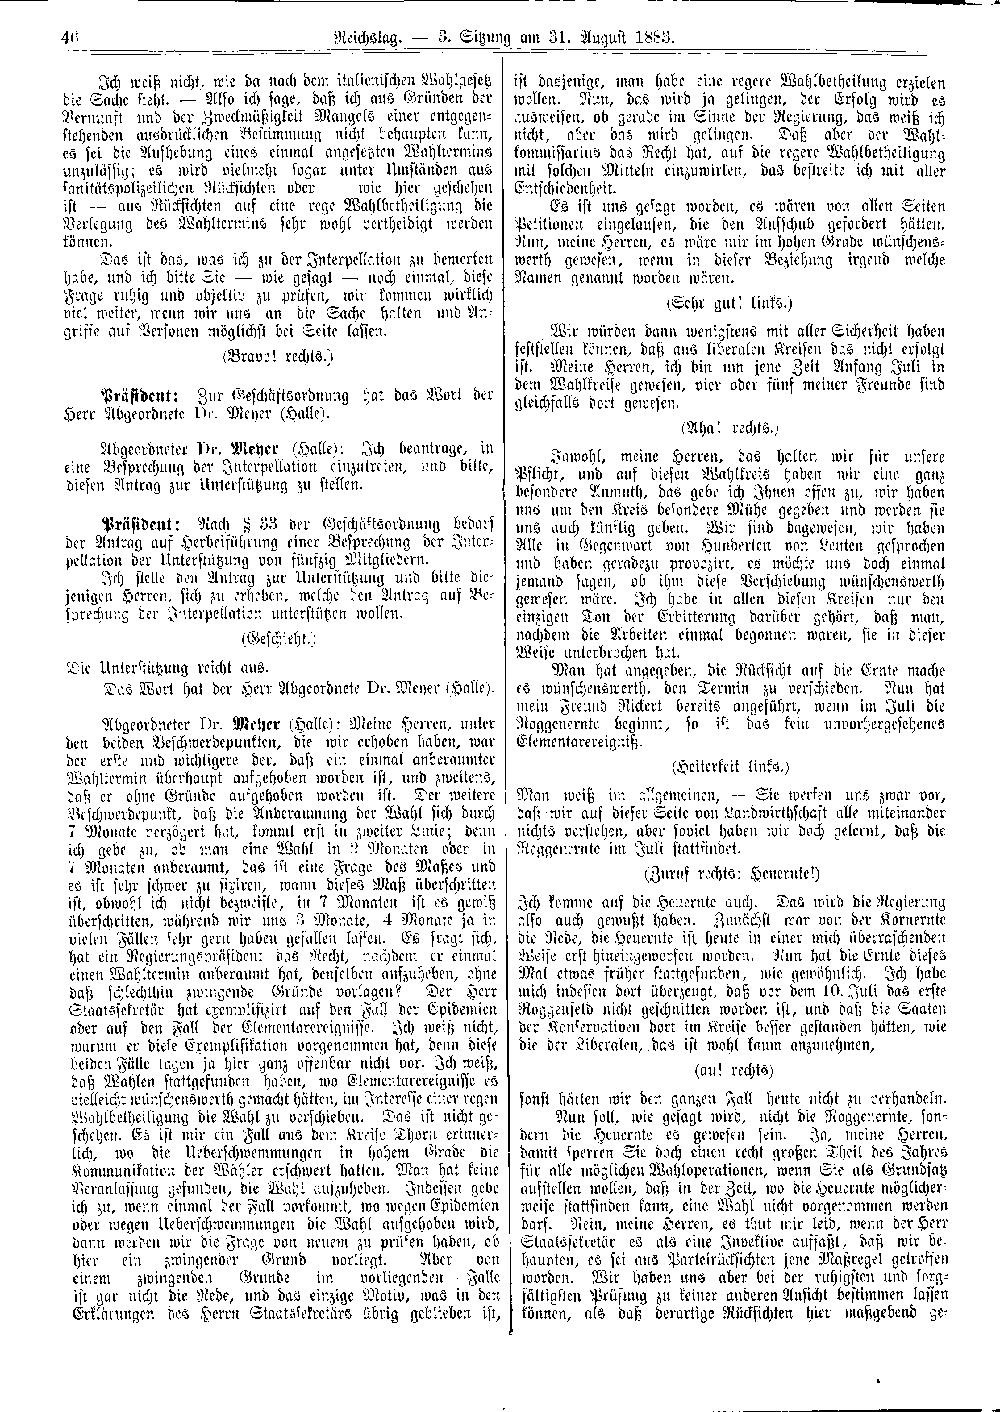 Scan of page 46